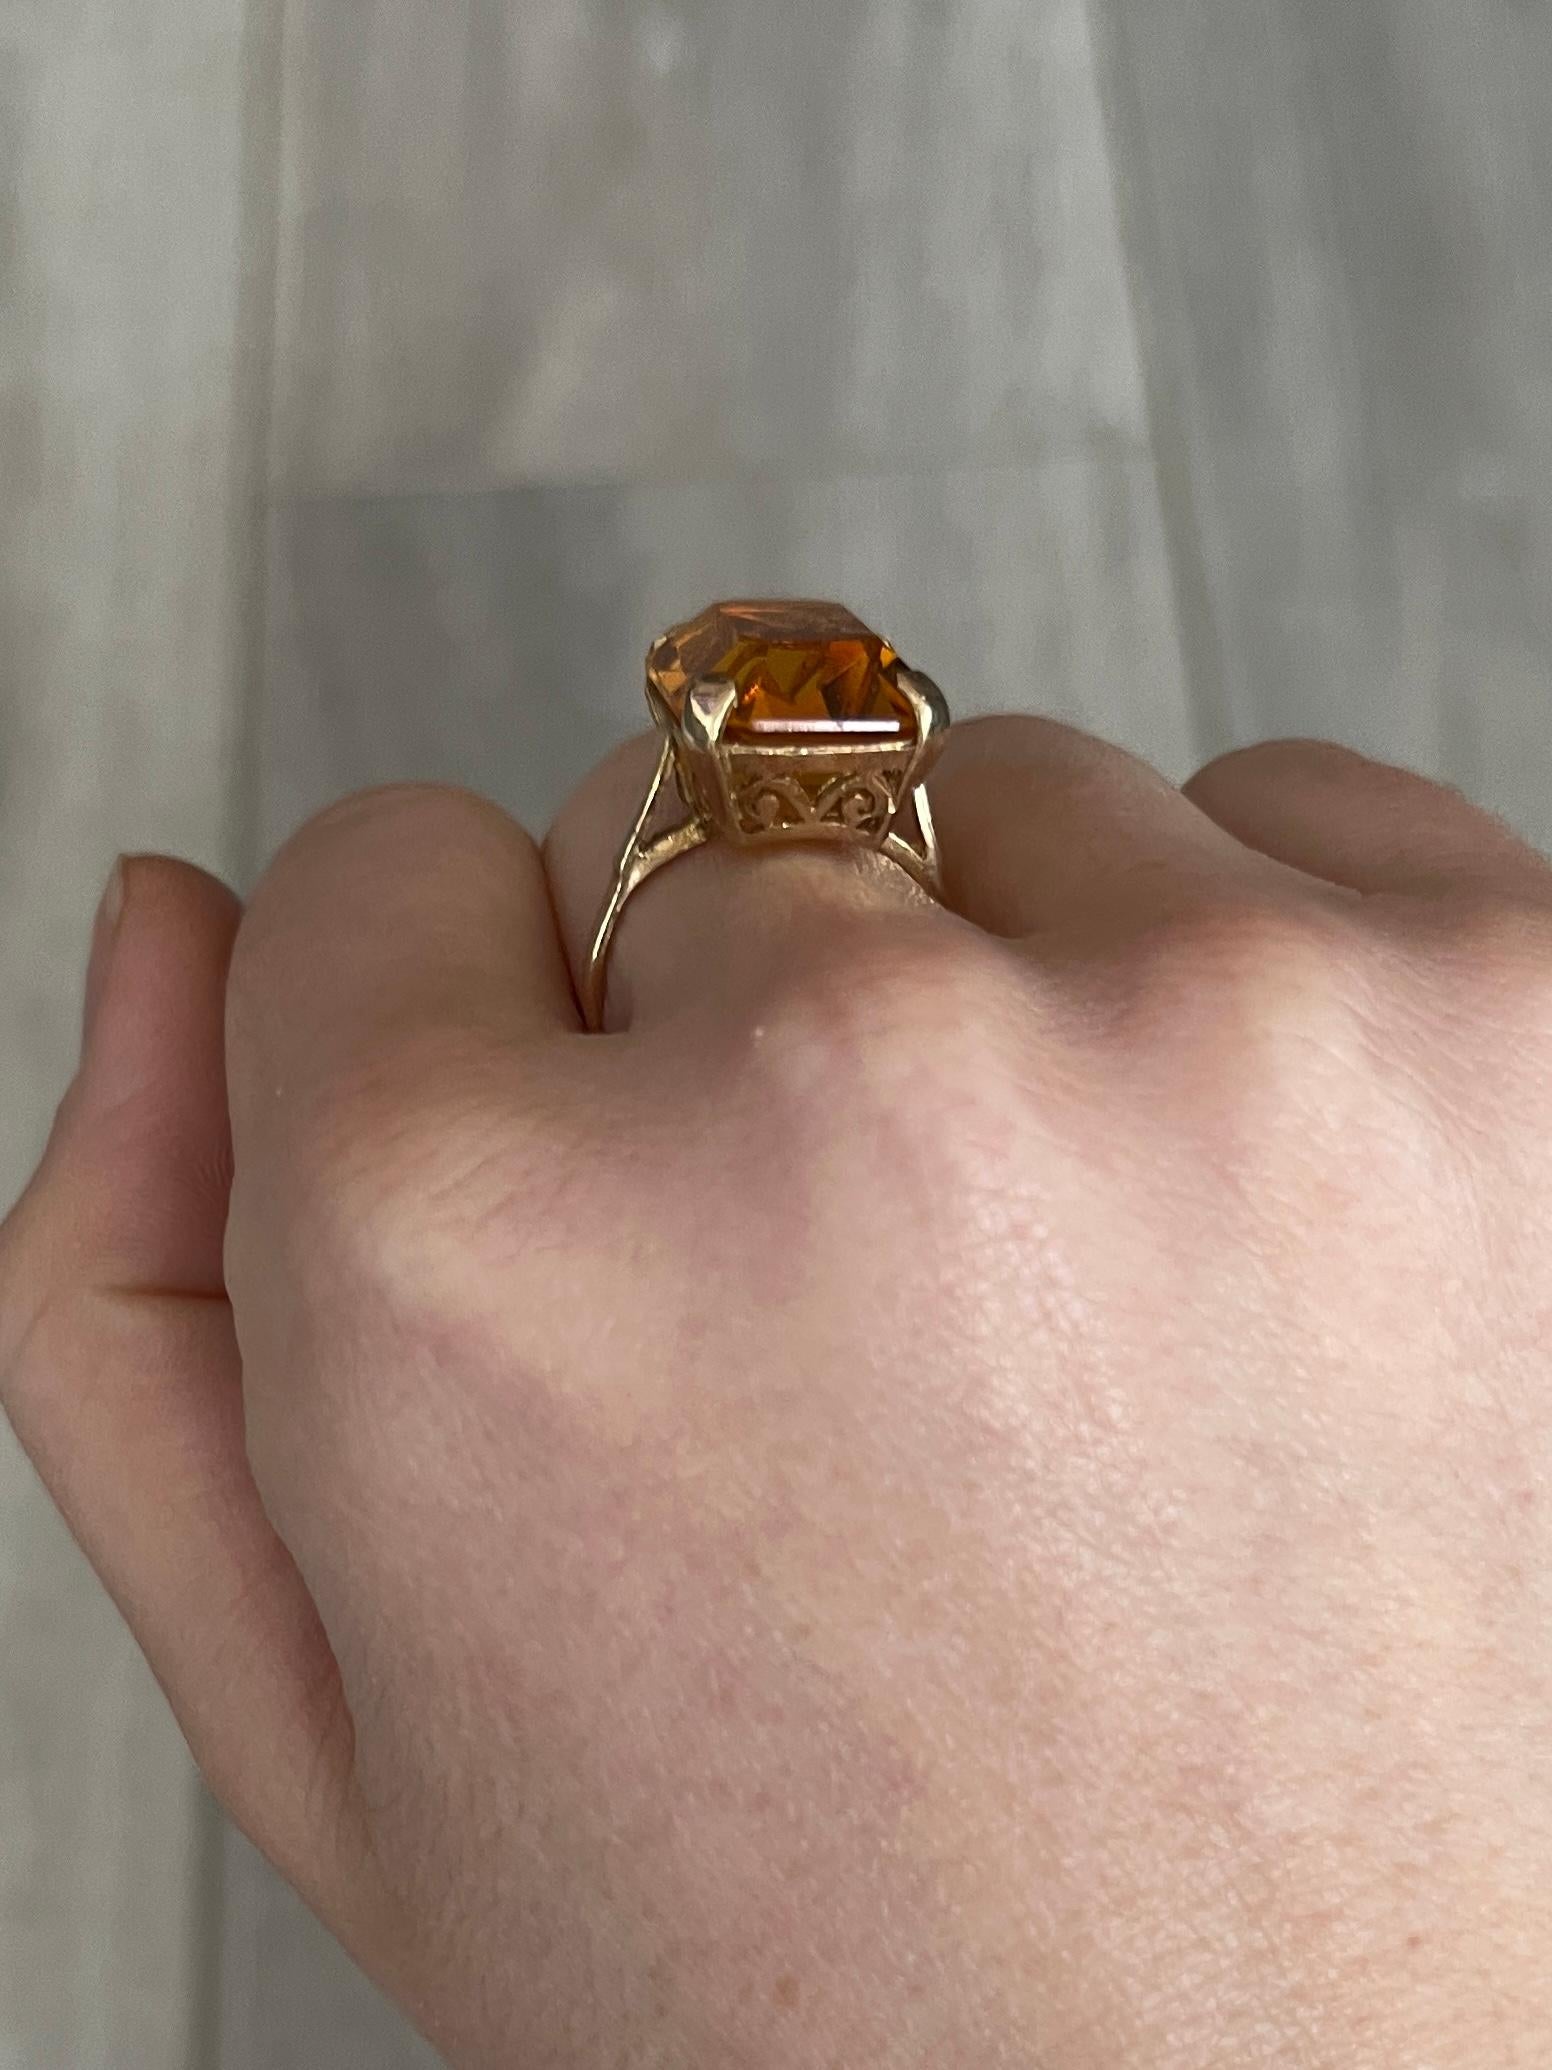 The gorgeous citrine stone in this ring is a muted yellow colour and is set in simple claws. The gallery is open and all modelled in 9carat gold. 

Ring Size: K or 5 1/4 
Stone Dimensions: 18x13mm
Height Off Finger: 9mm 

Weight: 5g